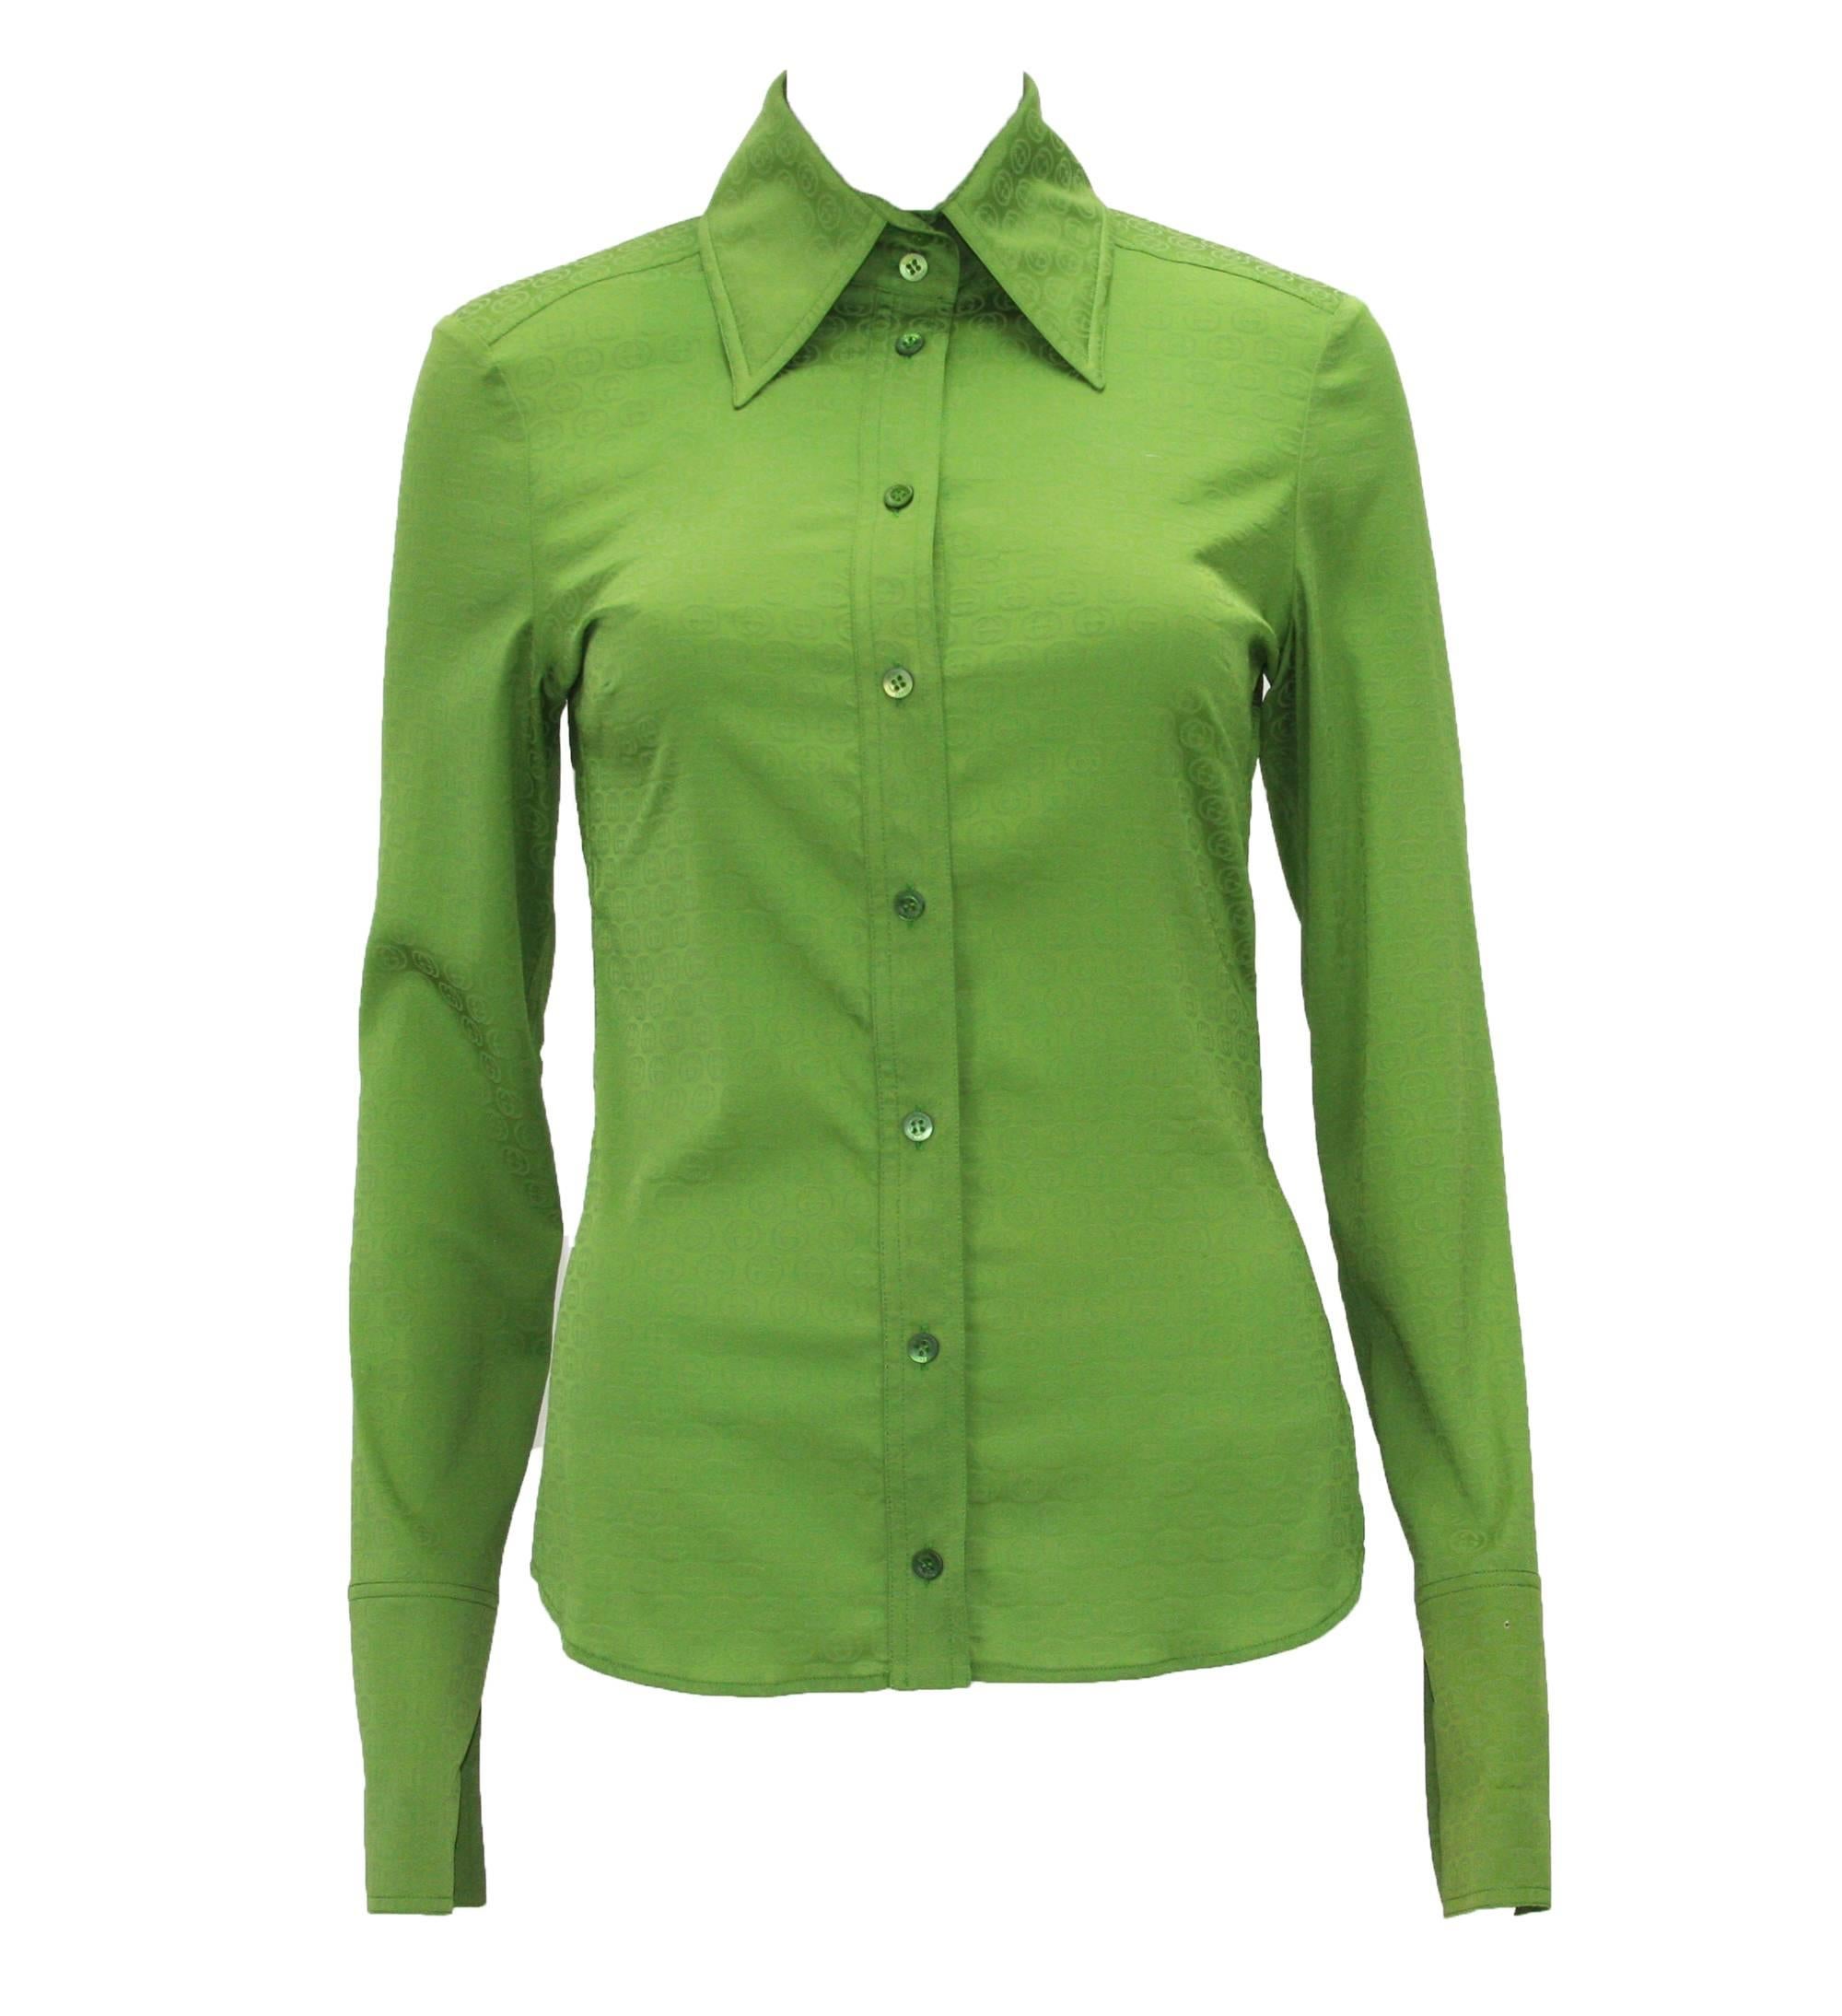 Neu Gucci by Tom Ford S/S 2003 Grünes GG-Muster Top Bluse It. 38 im Zustand „Neu“ im Angebot in Montgomery, TX